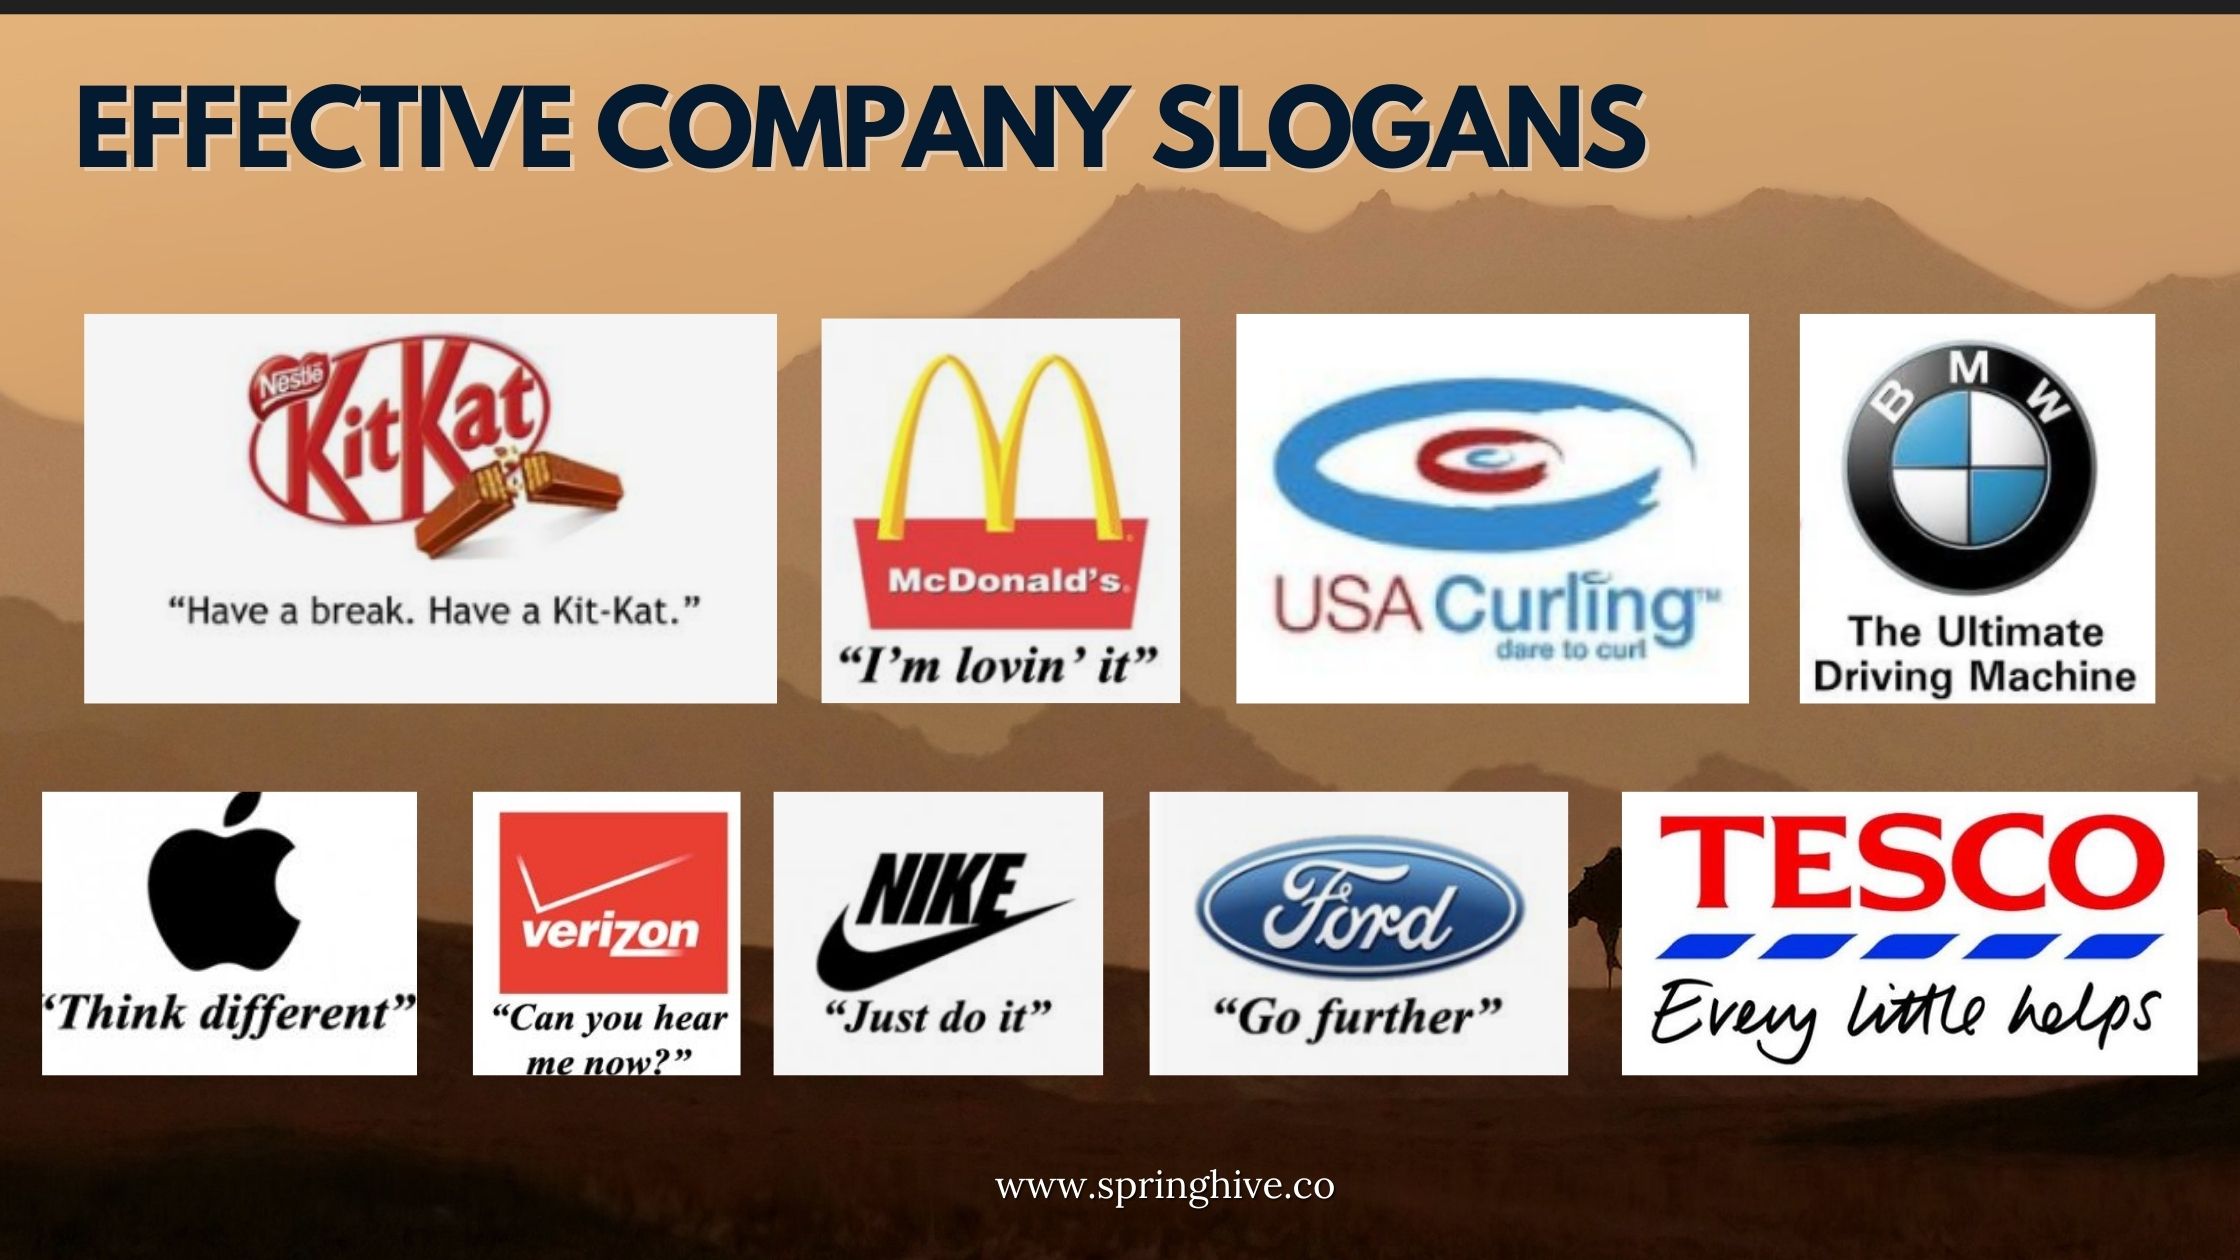 The Importance Of Having An Effective Company Slogan